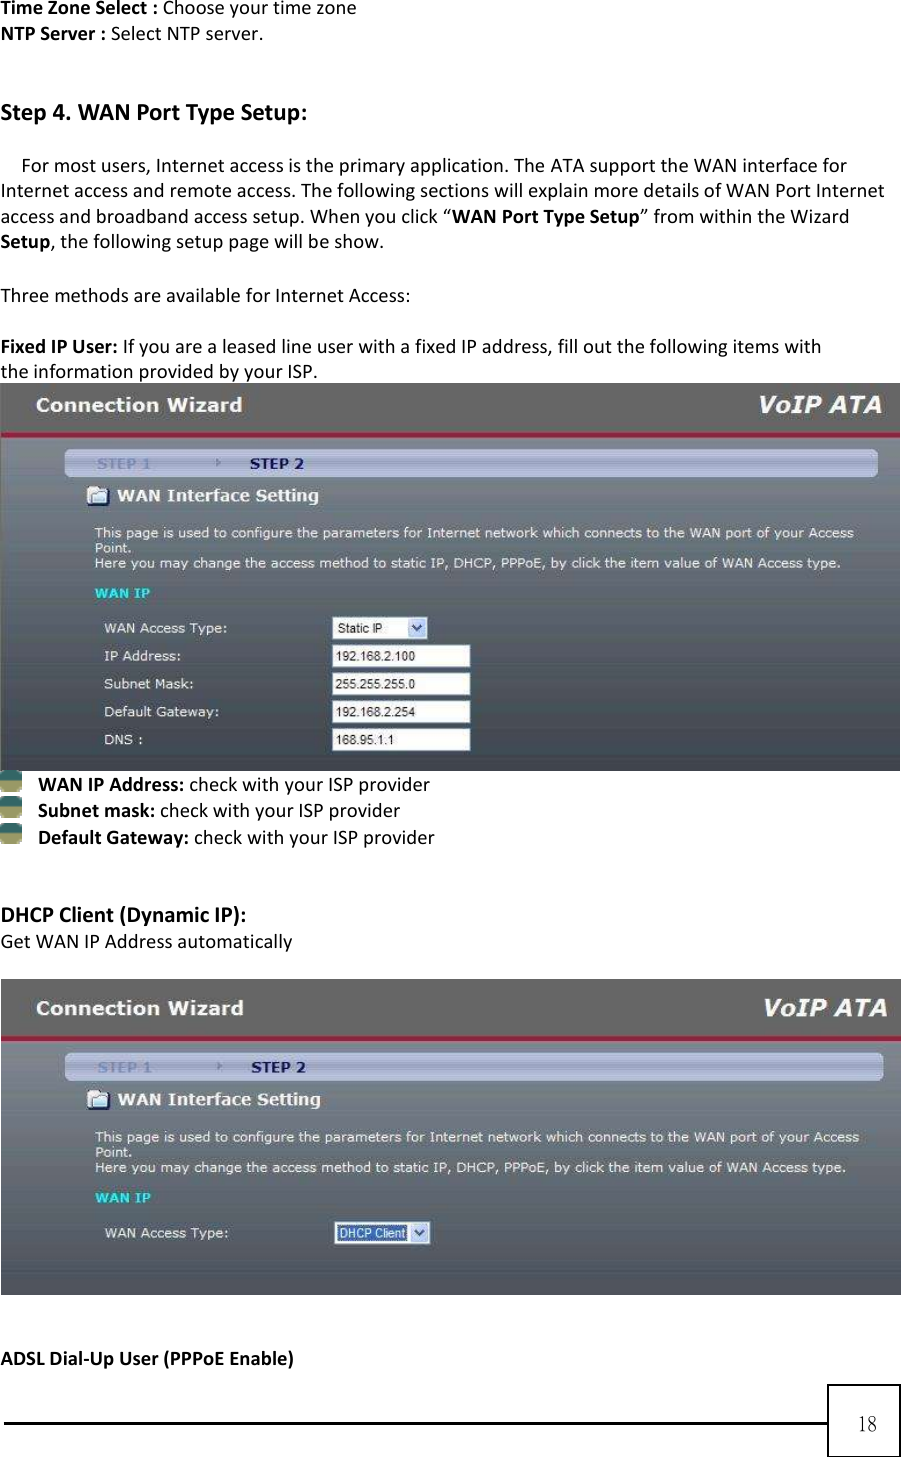  18  Time Zone Select : Choose your time zone NTP Server : Select NTP server.   Step 4. WAN Port Type Setup:  For most users, Internet access is the primary application. The ATA support the WAN interface for Internet access and remote access. The following sections will explain more details of WAN Port Internet access and broadband access setup. When you click “WAN Port Type Setup” from within the Wizard Setup, the following setup page will be show.  Three methods are available for Internet Access:  Fixed IP User: If you are a leased line user with a fixed IP address, fill out the following items with the information provided by your ISP.     WAN IP Address: check with your ISP provider    Subnet mask: check with your ISP provider    Default Gateway: check with your ISP provider     DHCP Client (Dynamic IP):   Get WAN IP Address automatically       ADSL Dial-Up User (PPPoE Enable) 